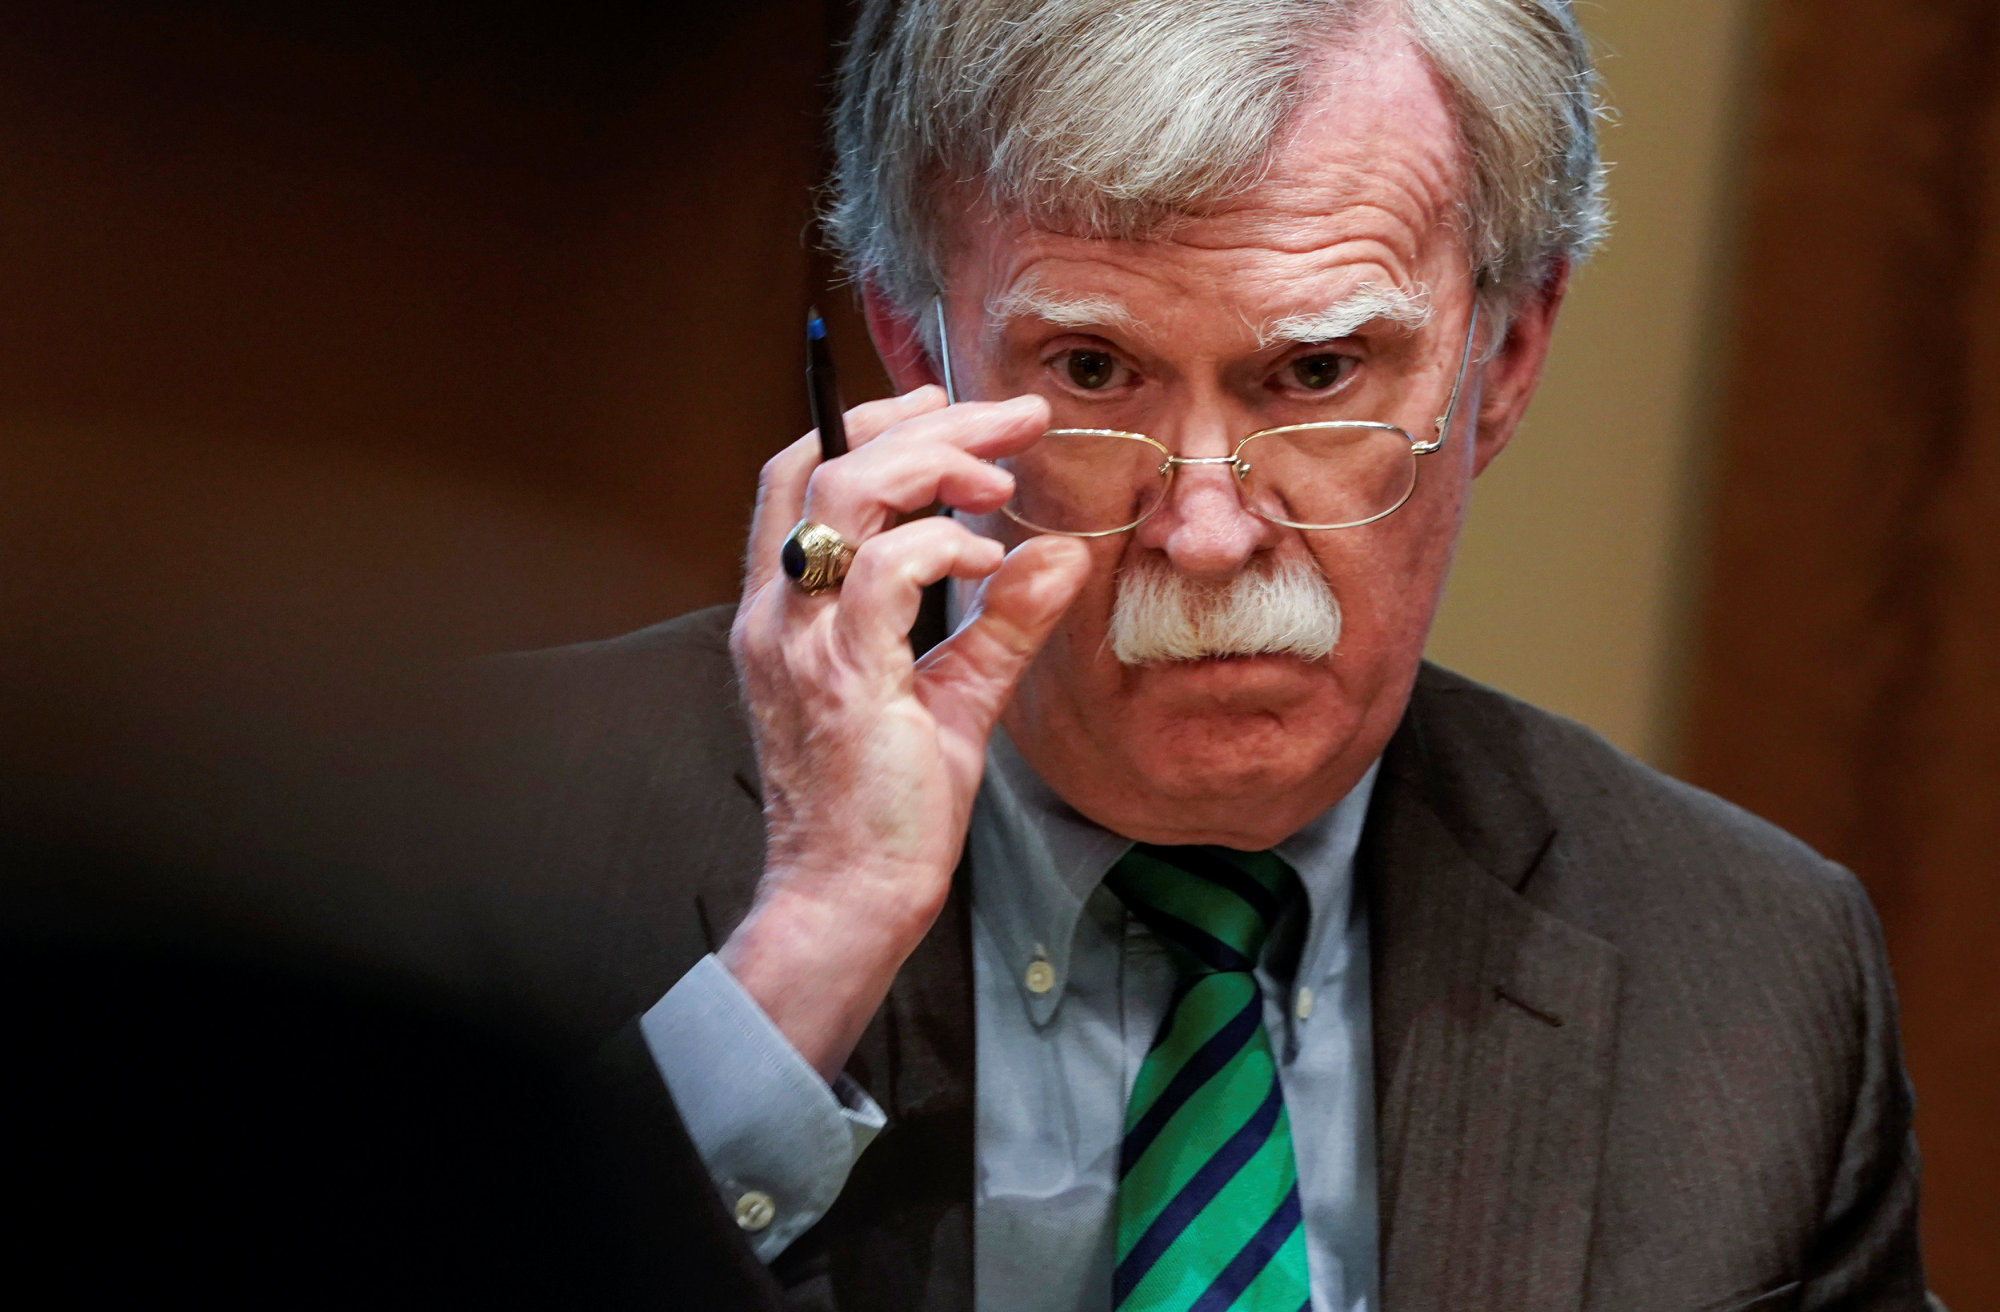 National Security Adviser John Bolton listens as U.S. President Donald Trump speaks while meeting with NATO Secretary General Jens Stoltenberg in the Oval Office at the White House on Tuesday. | REUTERS